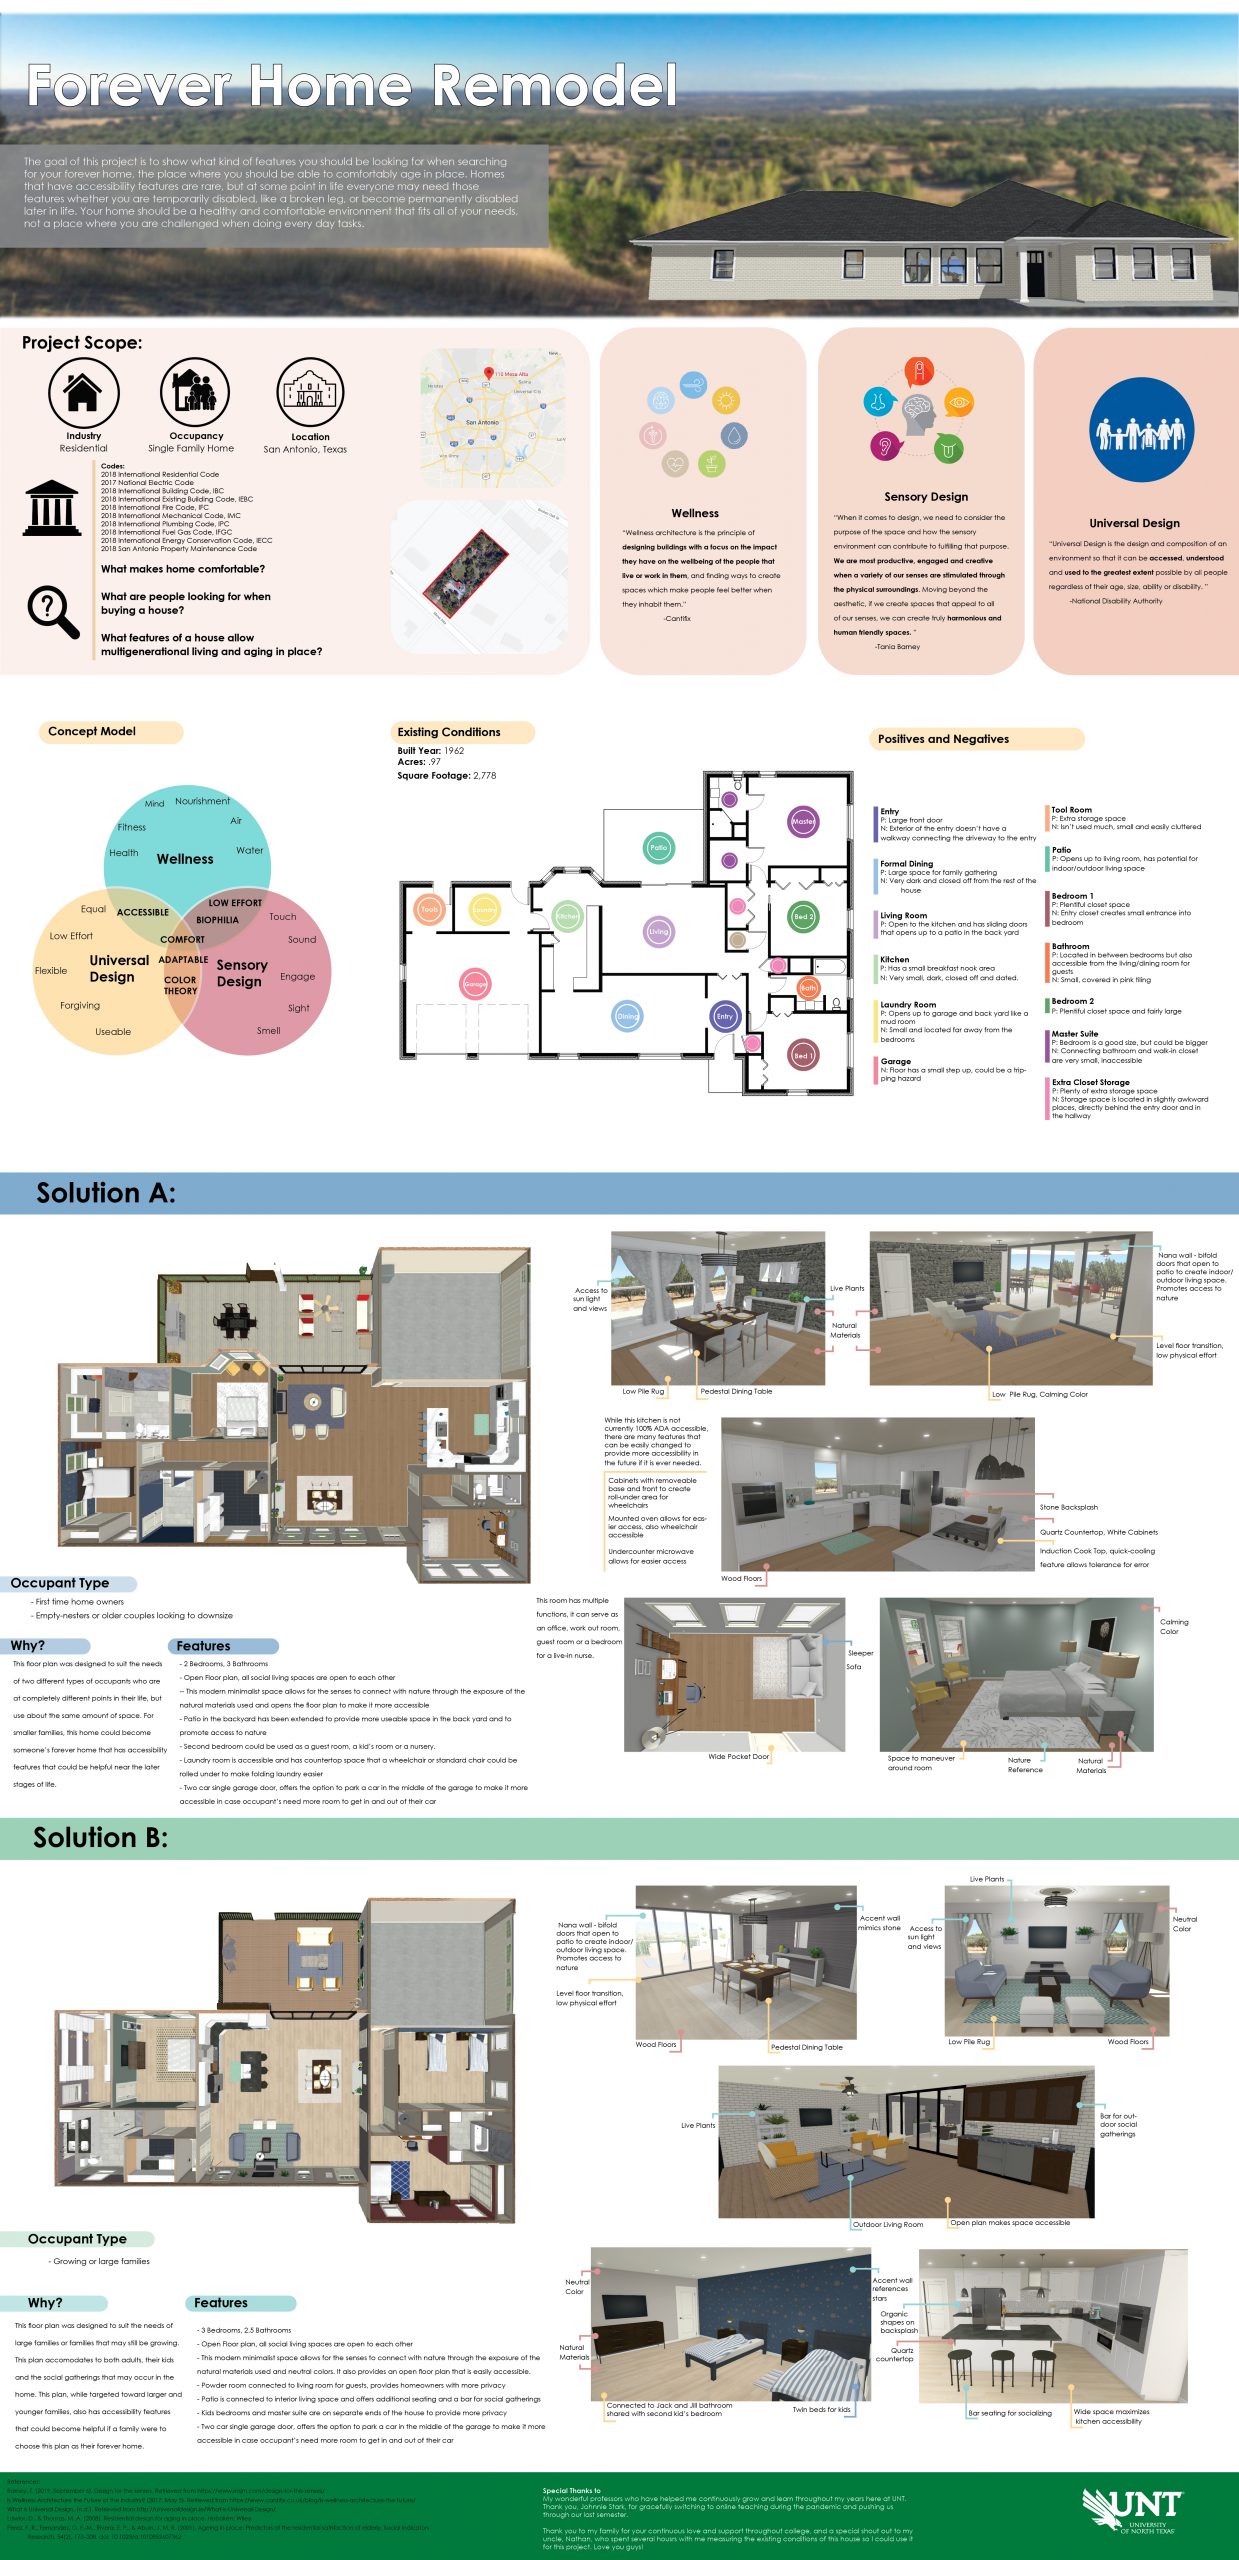 Forever home remodel, Project scope, concept model, solution A and B